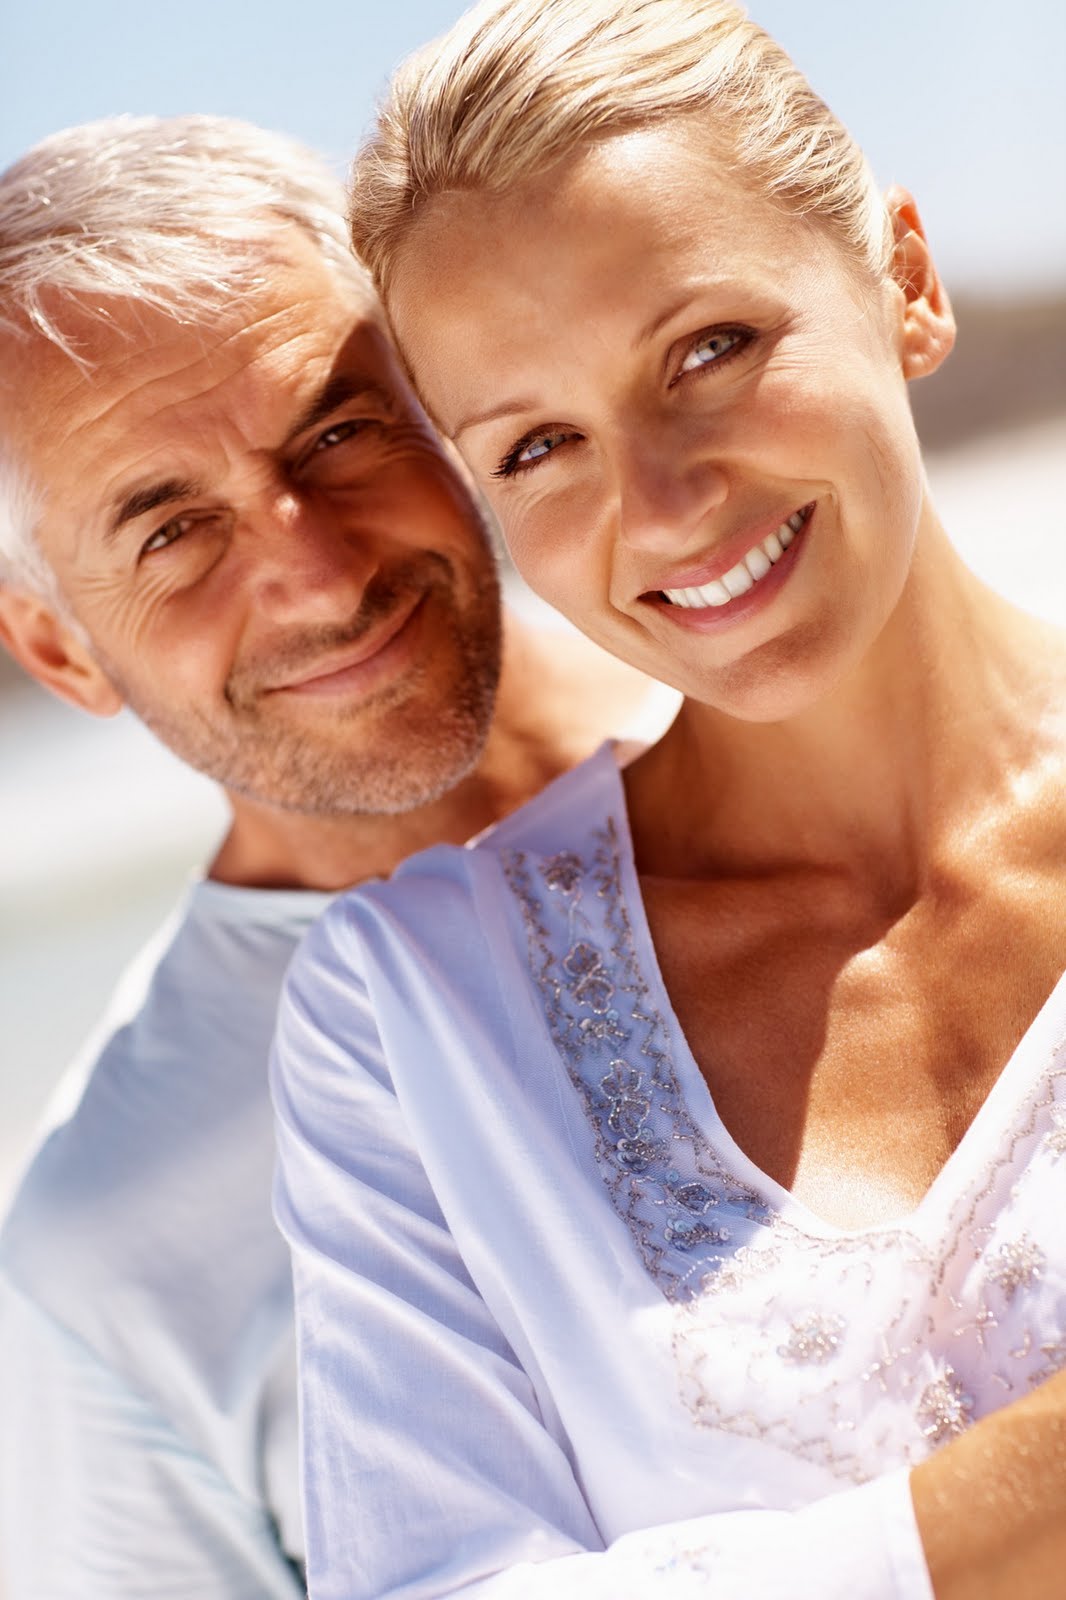 Best Free Dating App For Over 50S : The Best Dating App For Over 50s ...